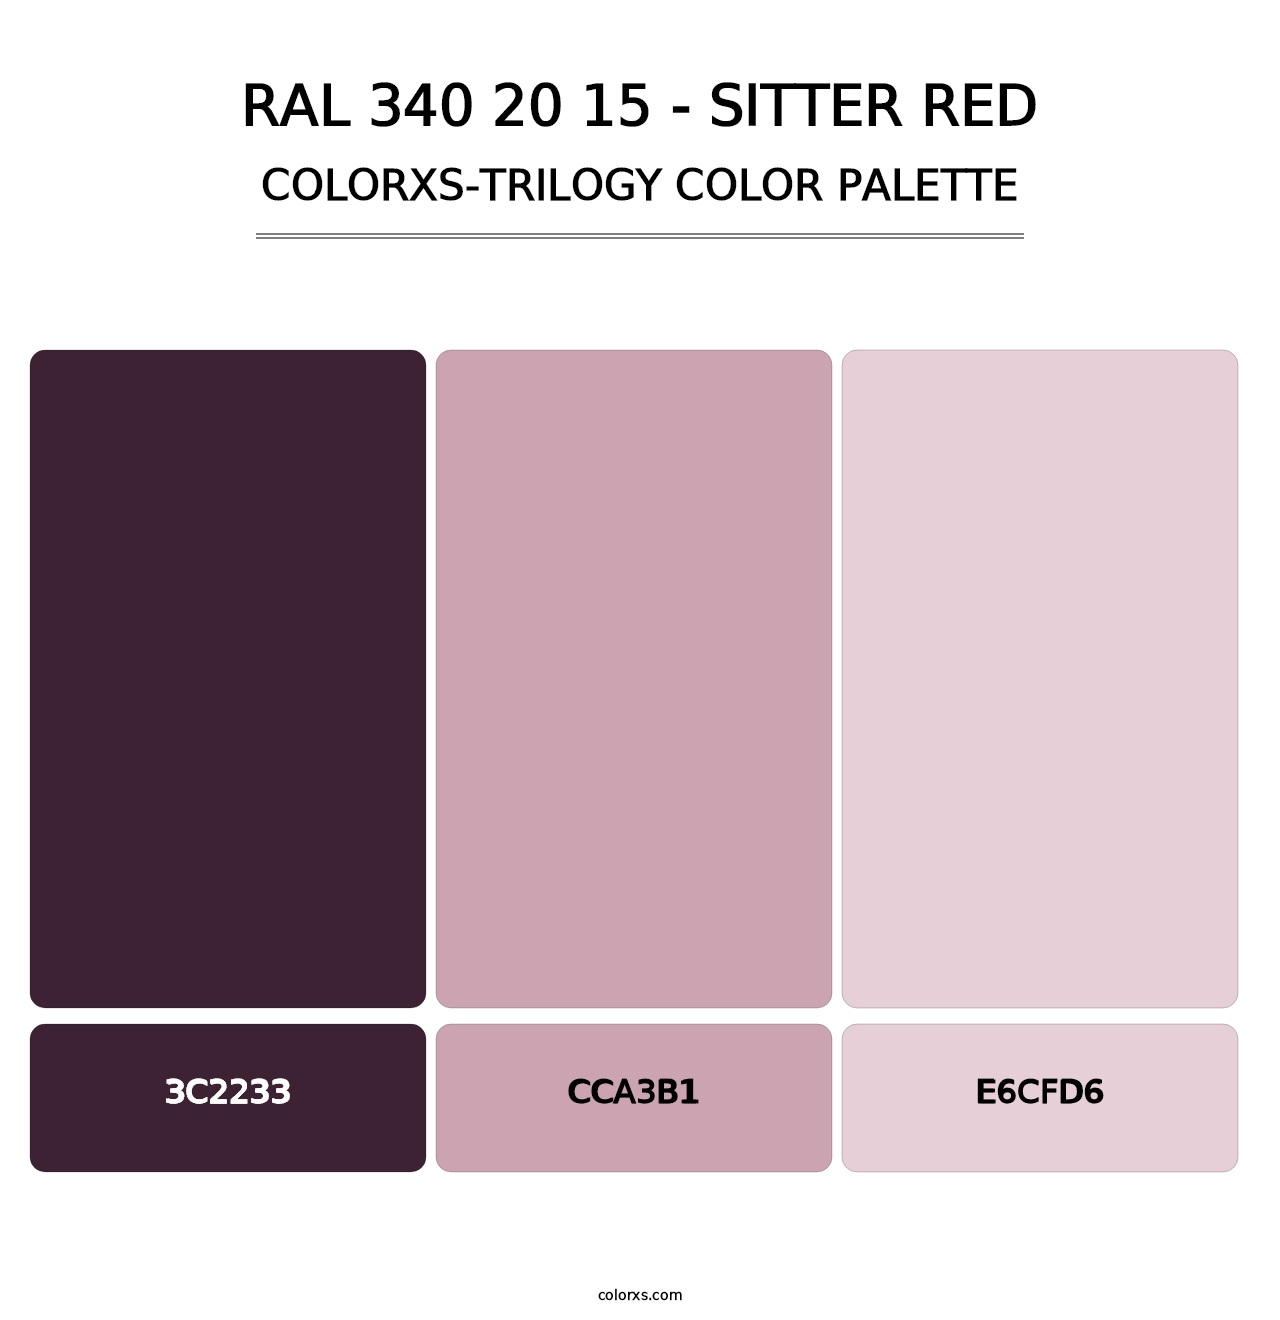 RAL 340 20 15 - Sitter Red - Colorxs Trilogy Palette